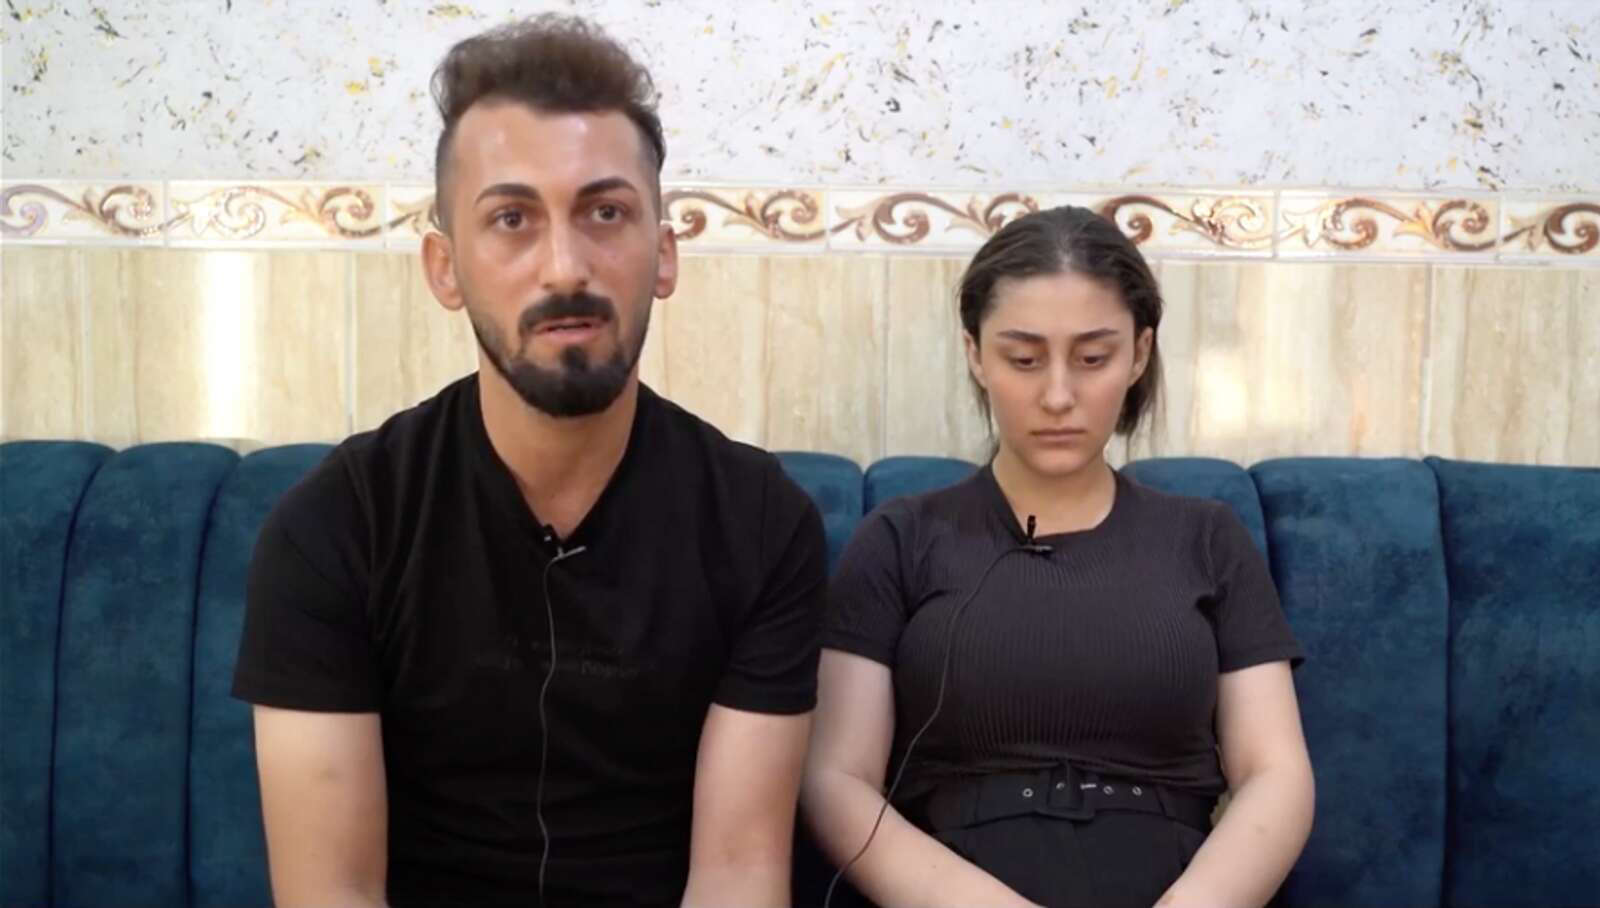 'We are dead inside' Groom from Iraq wedding fire that killed 107